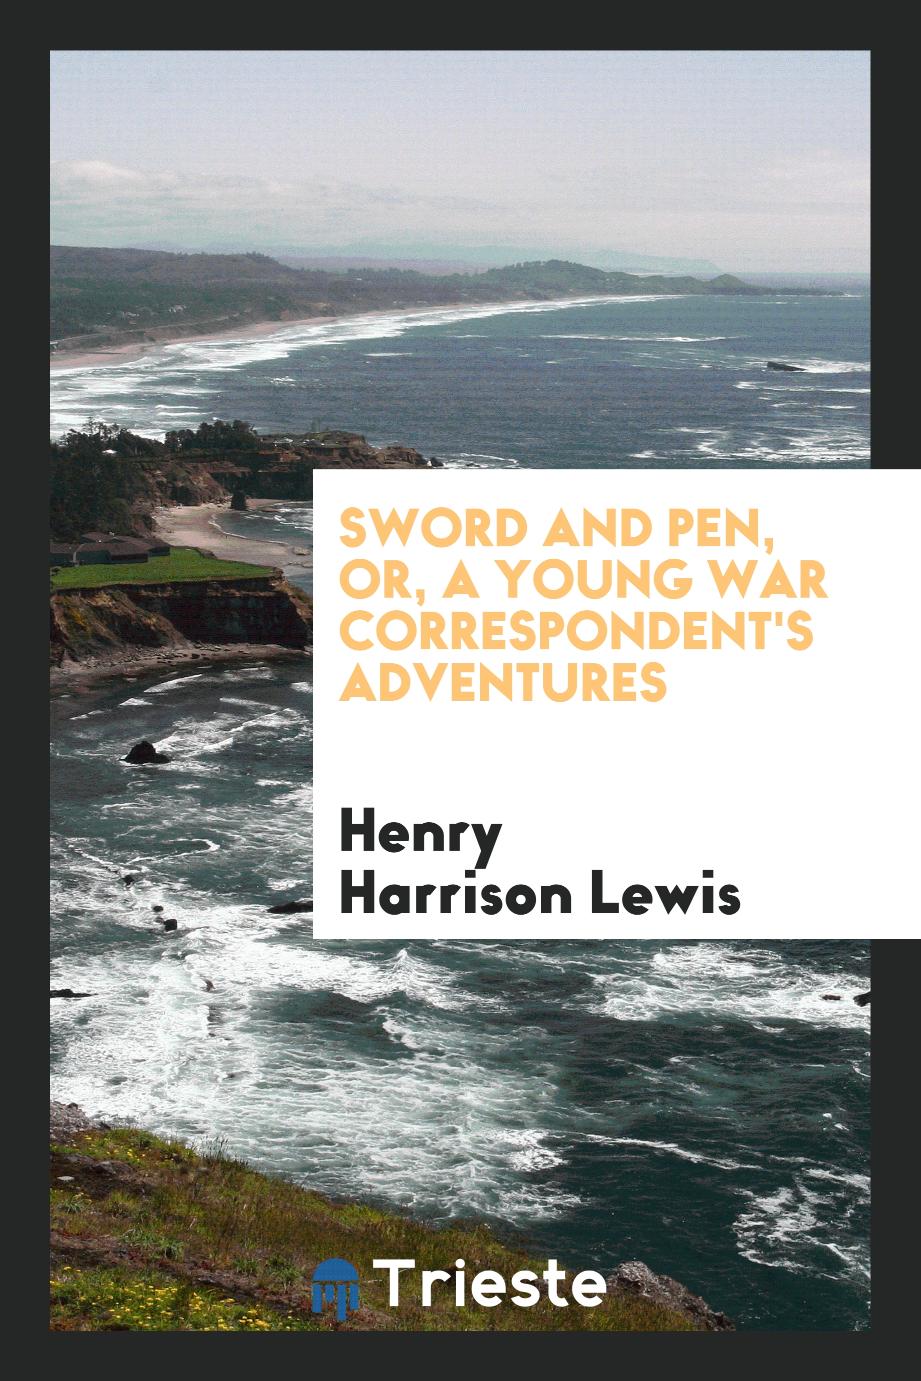 Sword and pen, or, A young war correspondent's adventures